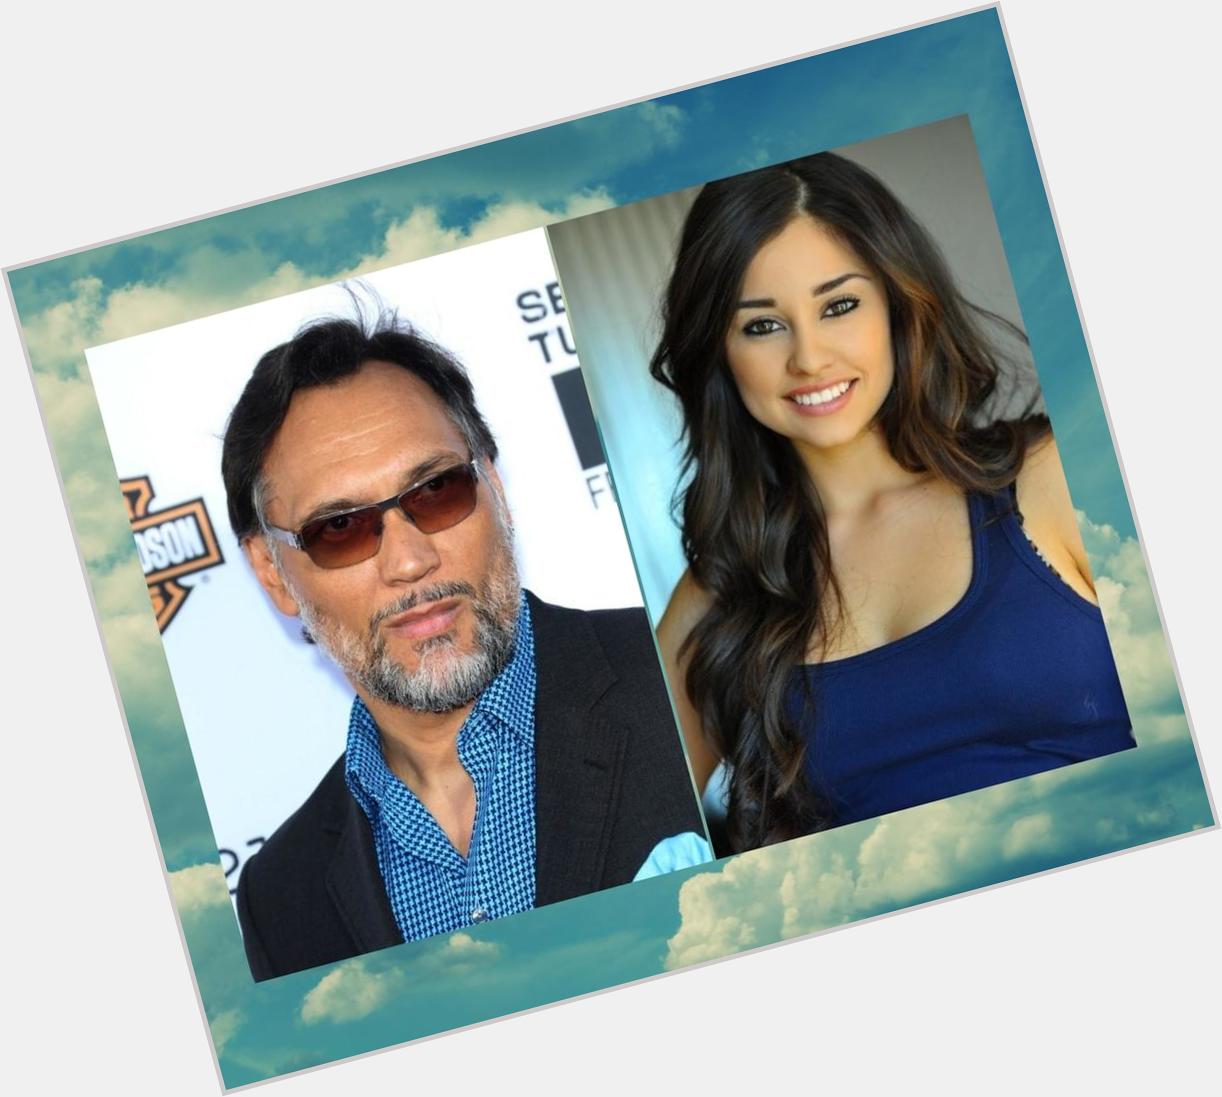   wishes Jimmy Smits and Yvette Monreal, a very happy birthday.  